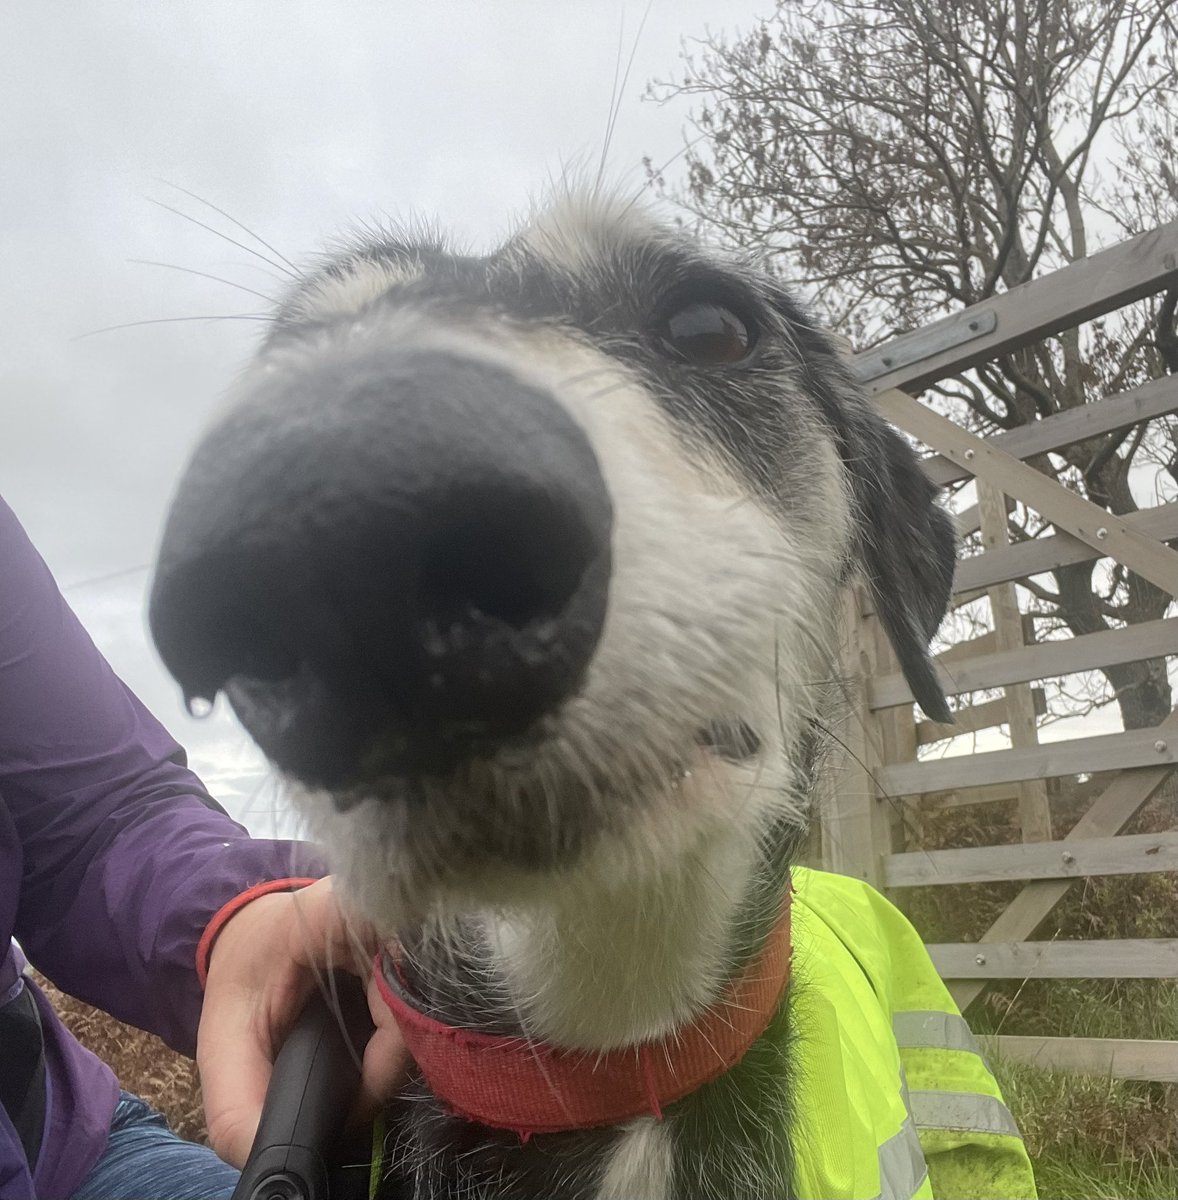 Morning folks! I’m smiling now feeling fully recovered! Thanks for all the boops ! Here’s a drippy nose boop back! #houndsoftwitter #rescuedogs